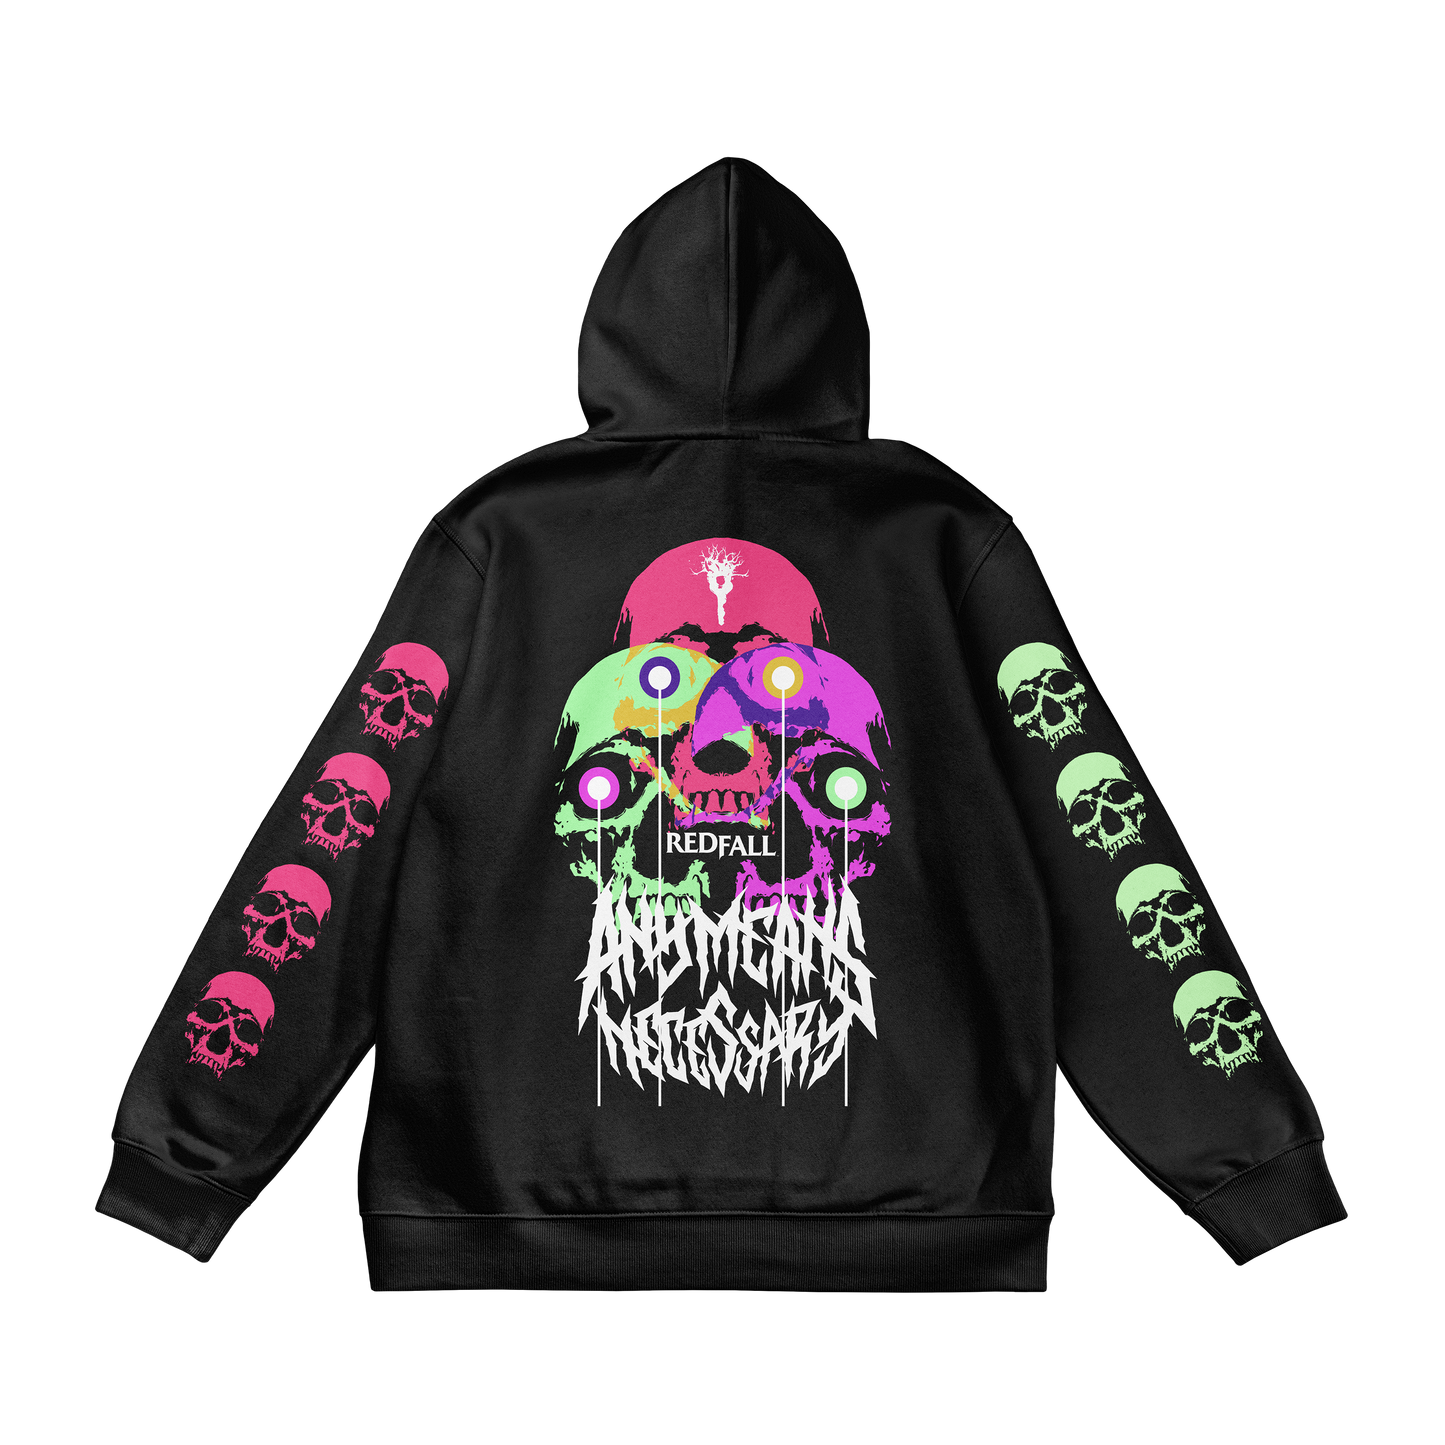 any means necessary shawn coss red fall game xbox microsoft bethesda studios 3 skulls pullover hoodie black back